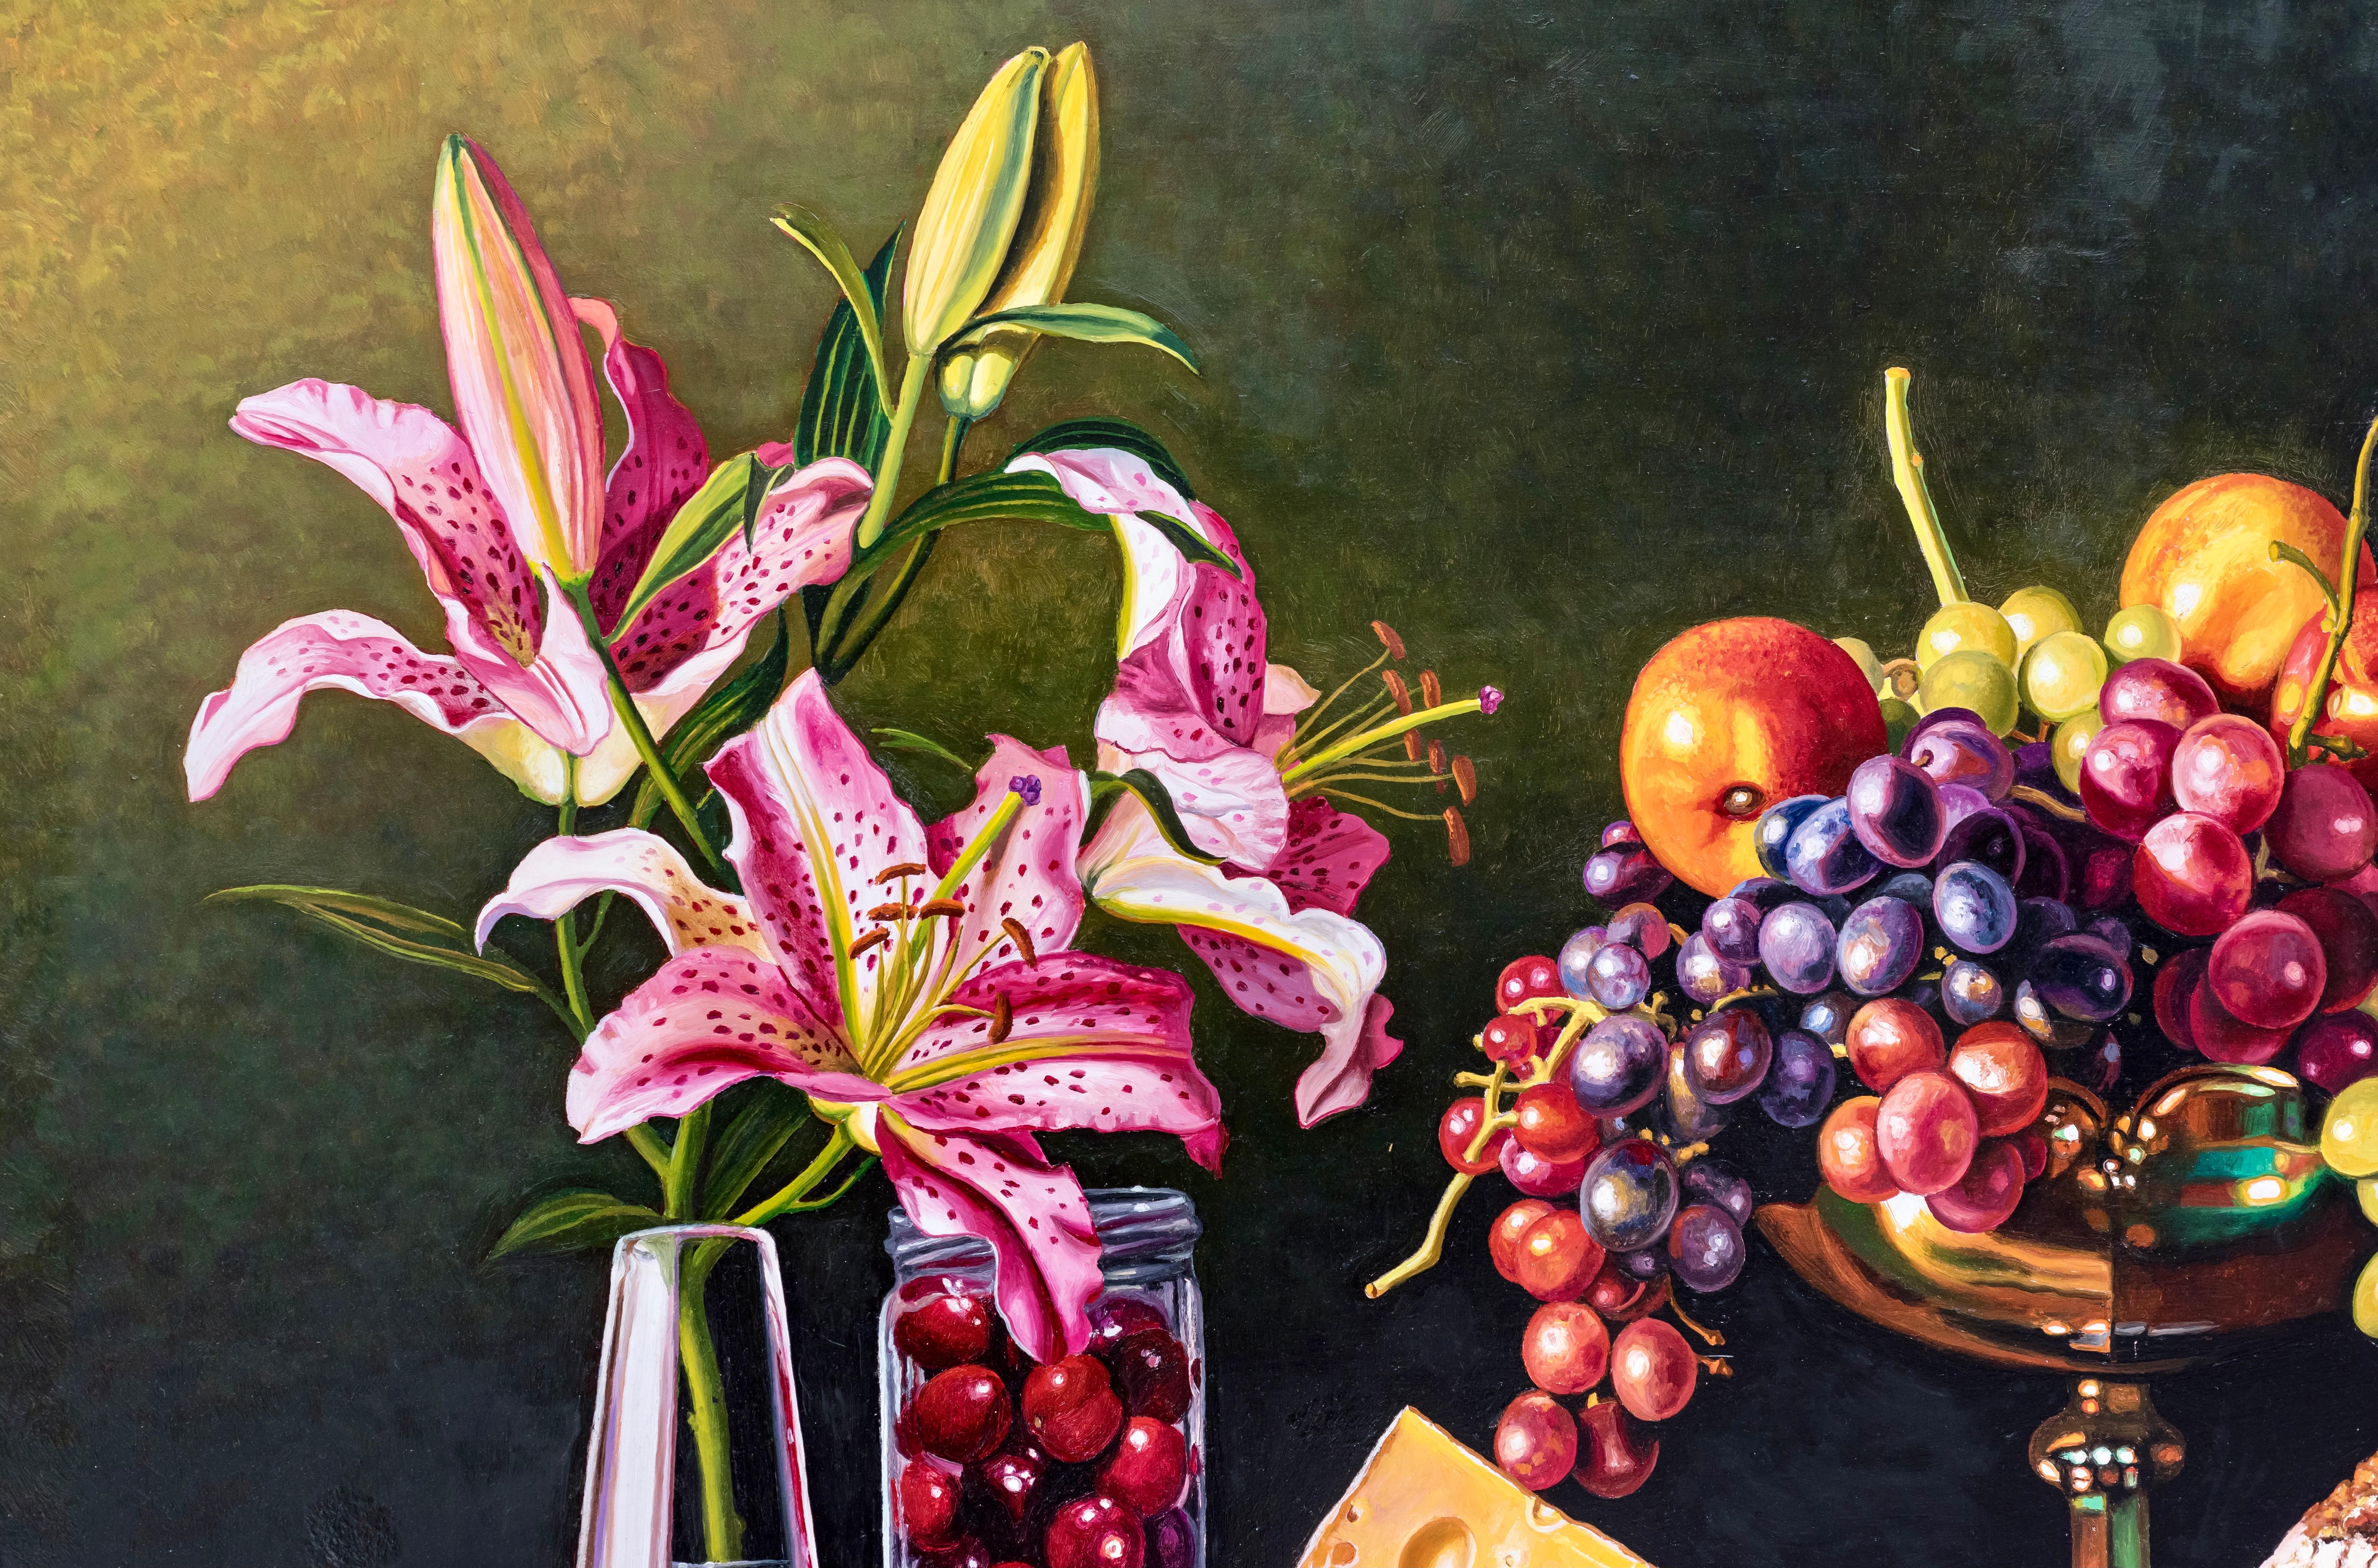 Still Life with Bread, Cheese, Grapes and Lillies - Photorealist Painting by Ian Hornak